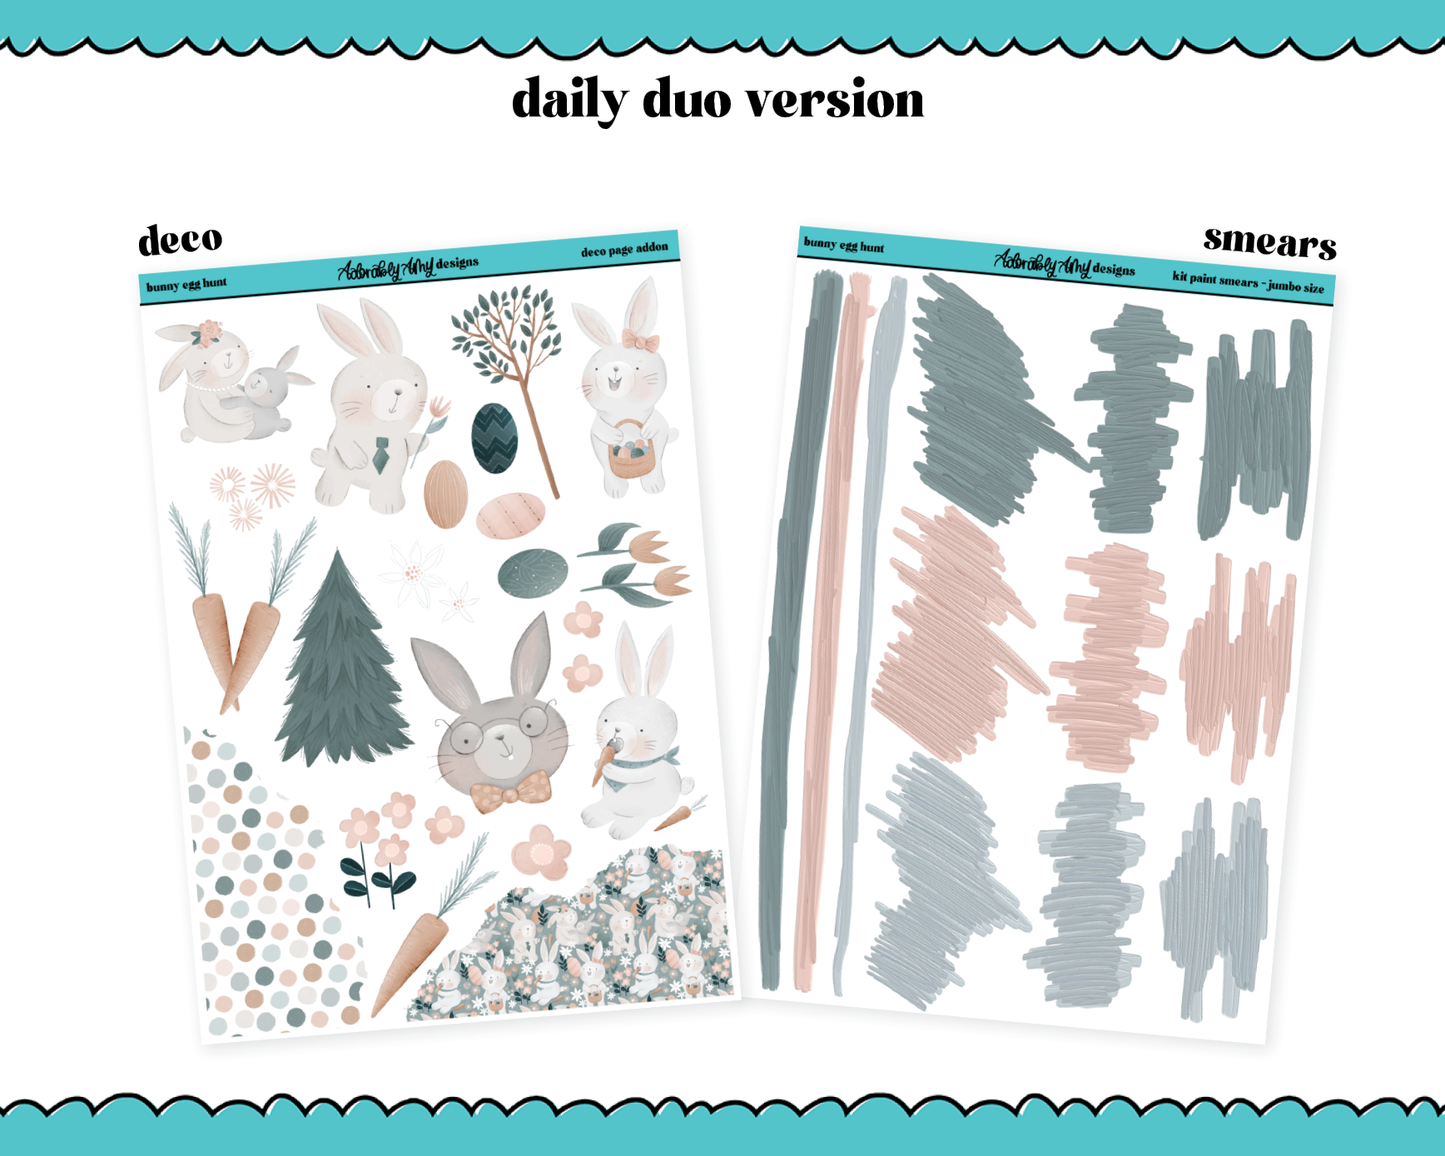 Daily Duo Bunny Egg Hunt Watercolor Weekly Planner Sticker Kit for Daily Duo Planner